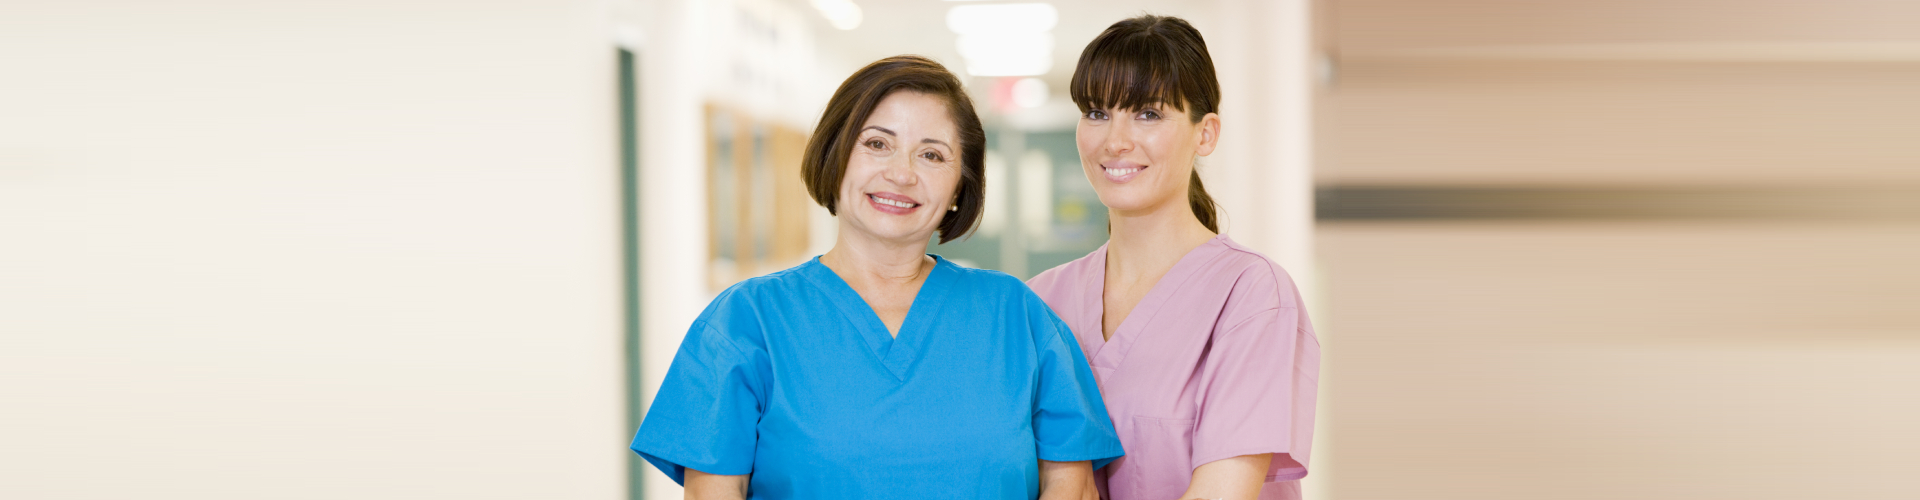 two medical worker smiling